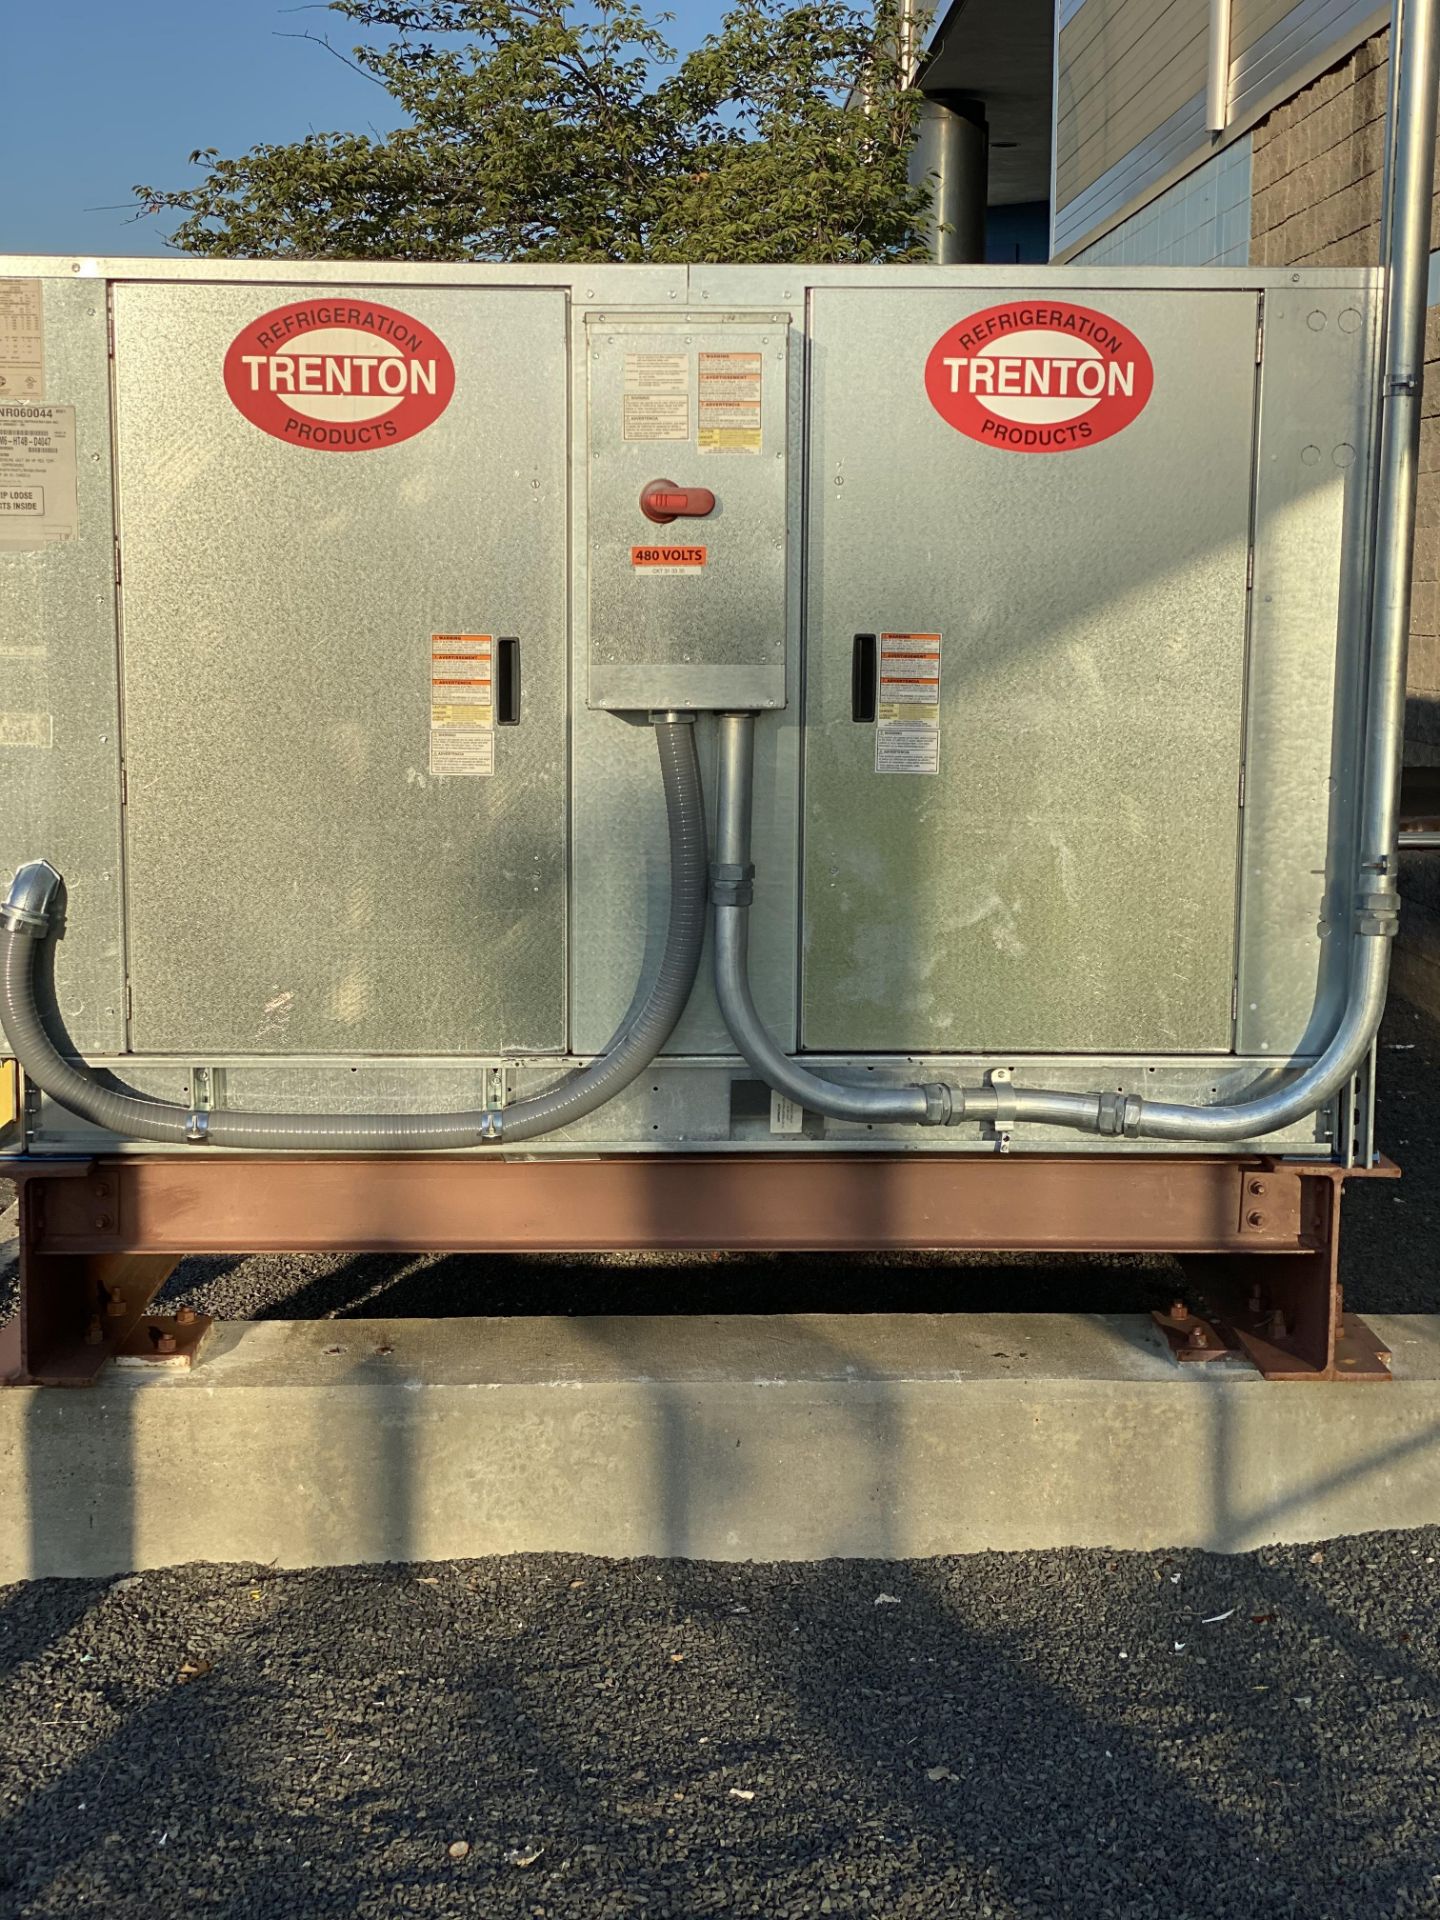 2019 TRENTON REFRIGERATION PRODUCTS CONDENSING UNIT (CONDENSER), MODEL TL4Z060M6-HT4B-D4047, S/N - Image 5 of 10